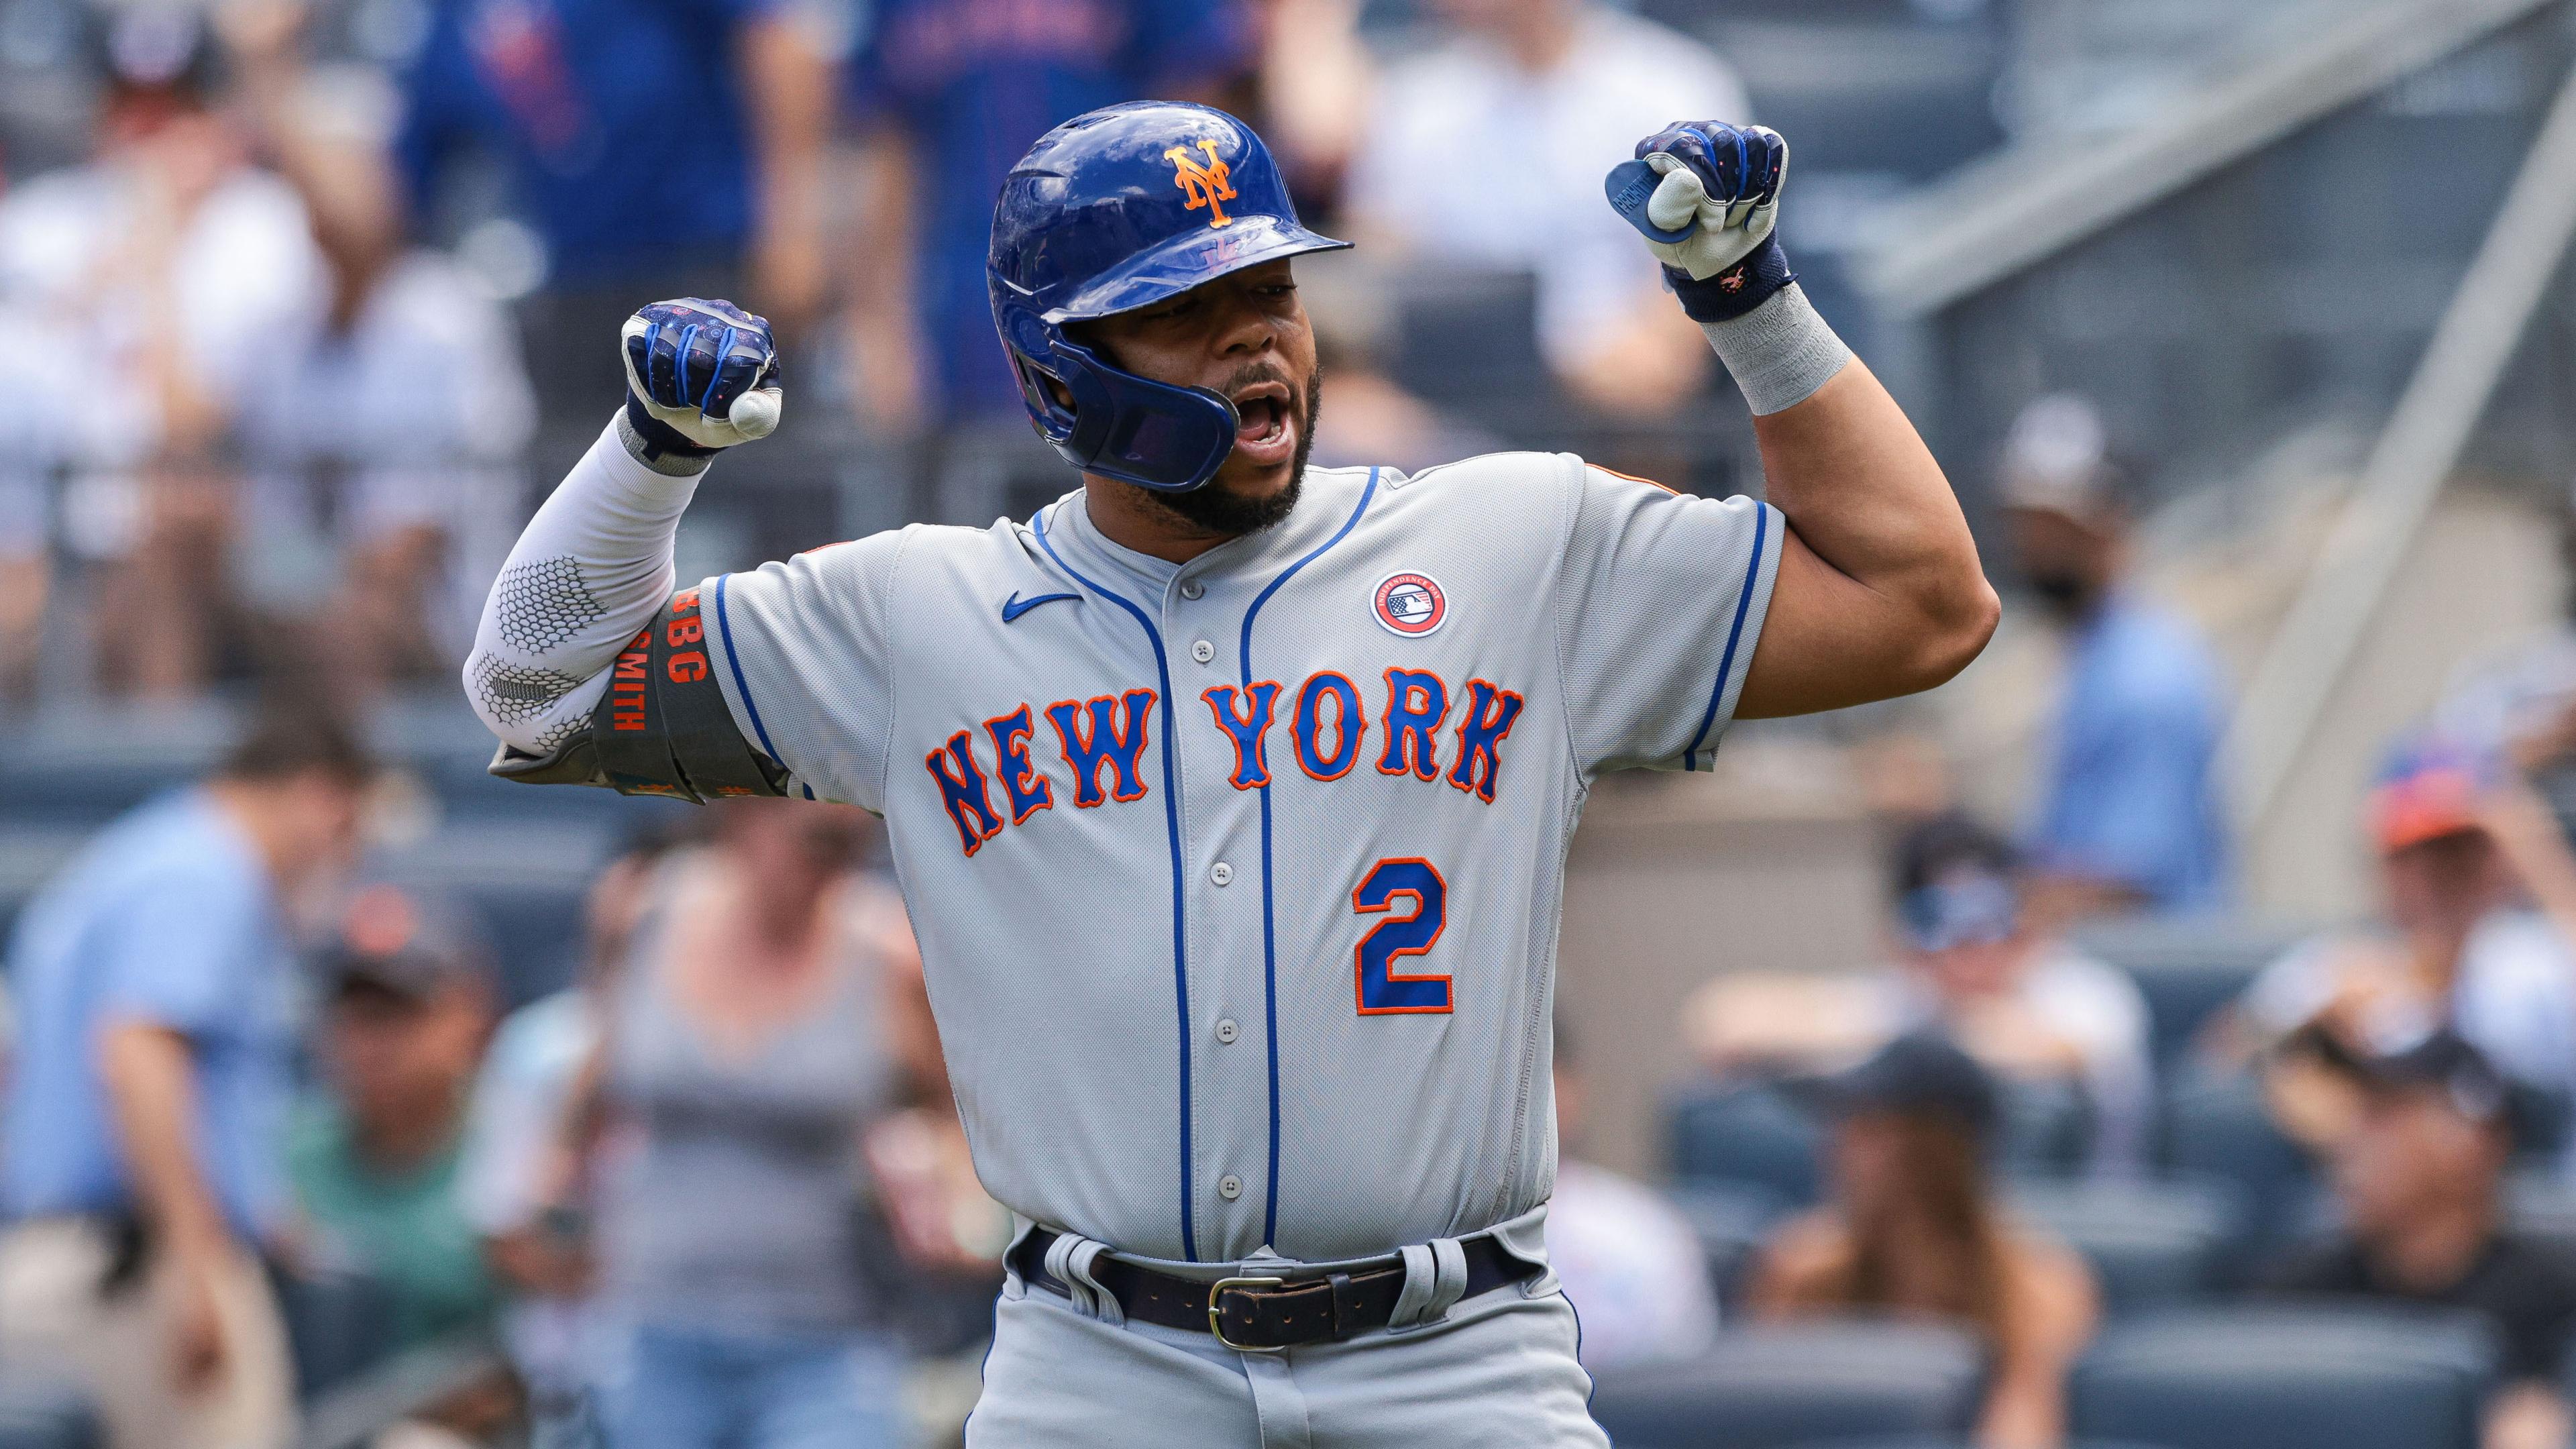 New York Mets first baseman Dominic Smith (2) reacts after hitting a solo home run during the first inning against the New York Yankees at Yankee Stadium. / Vincent Carchietta-USA TODAY Sports